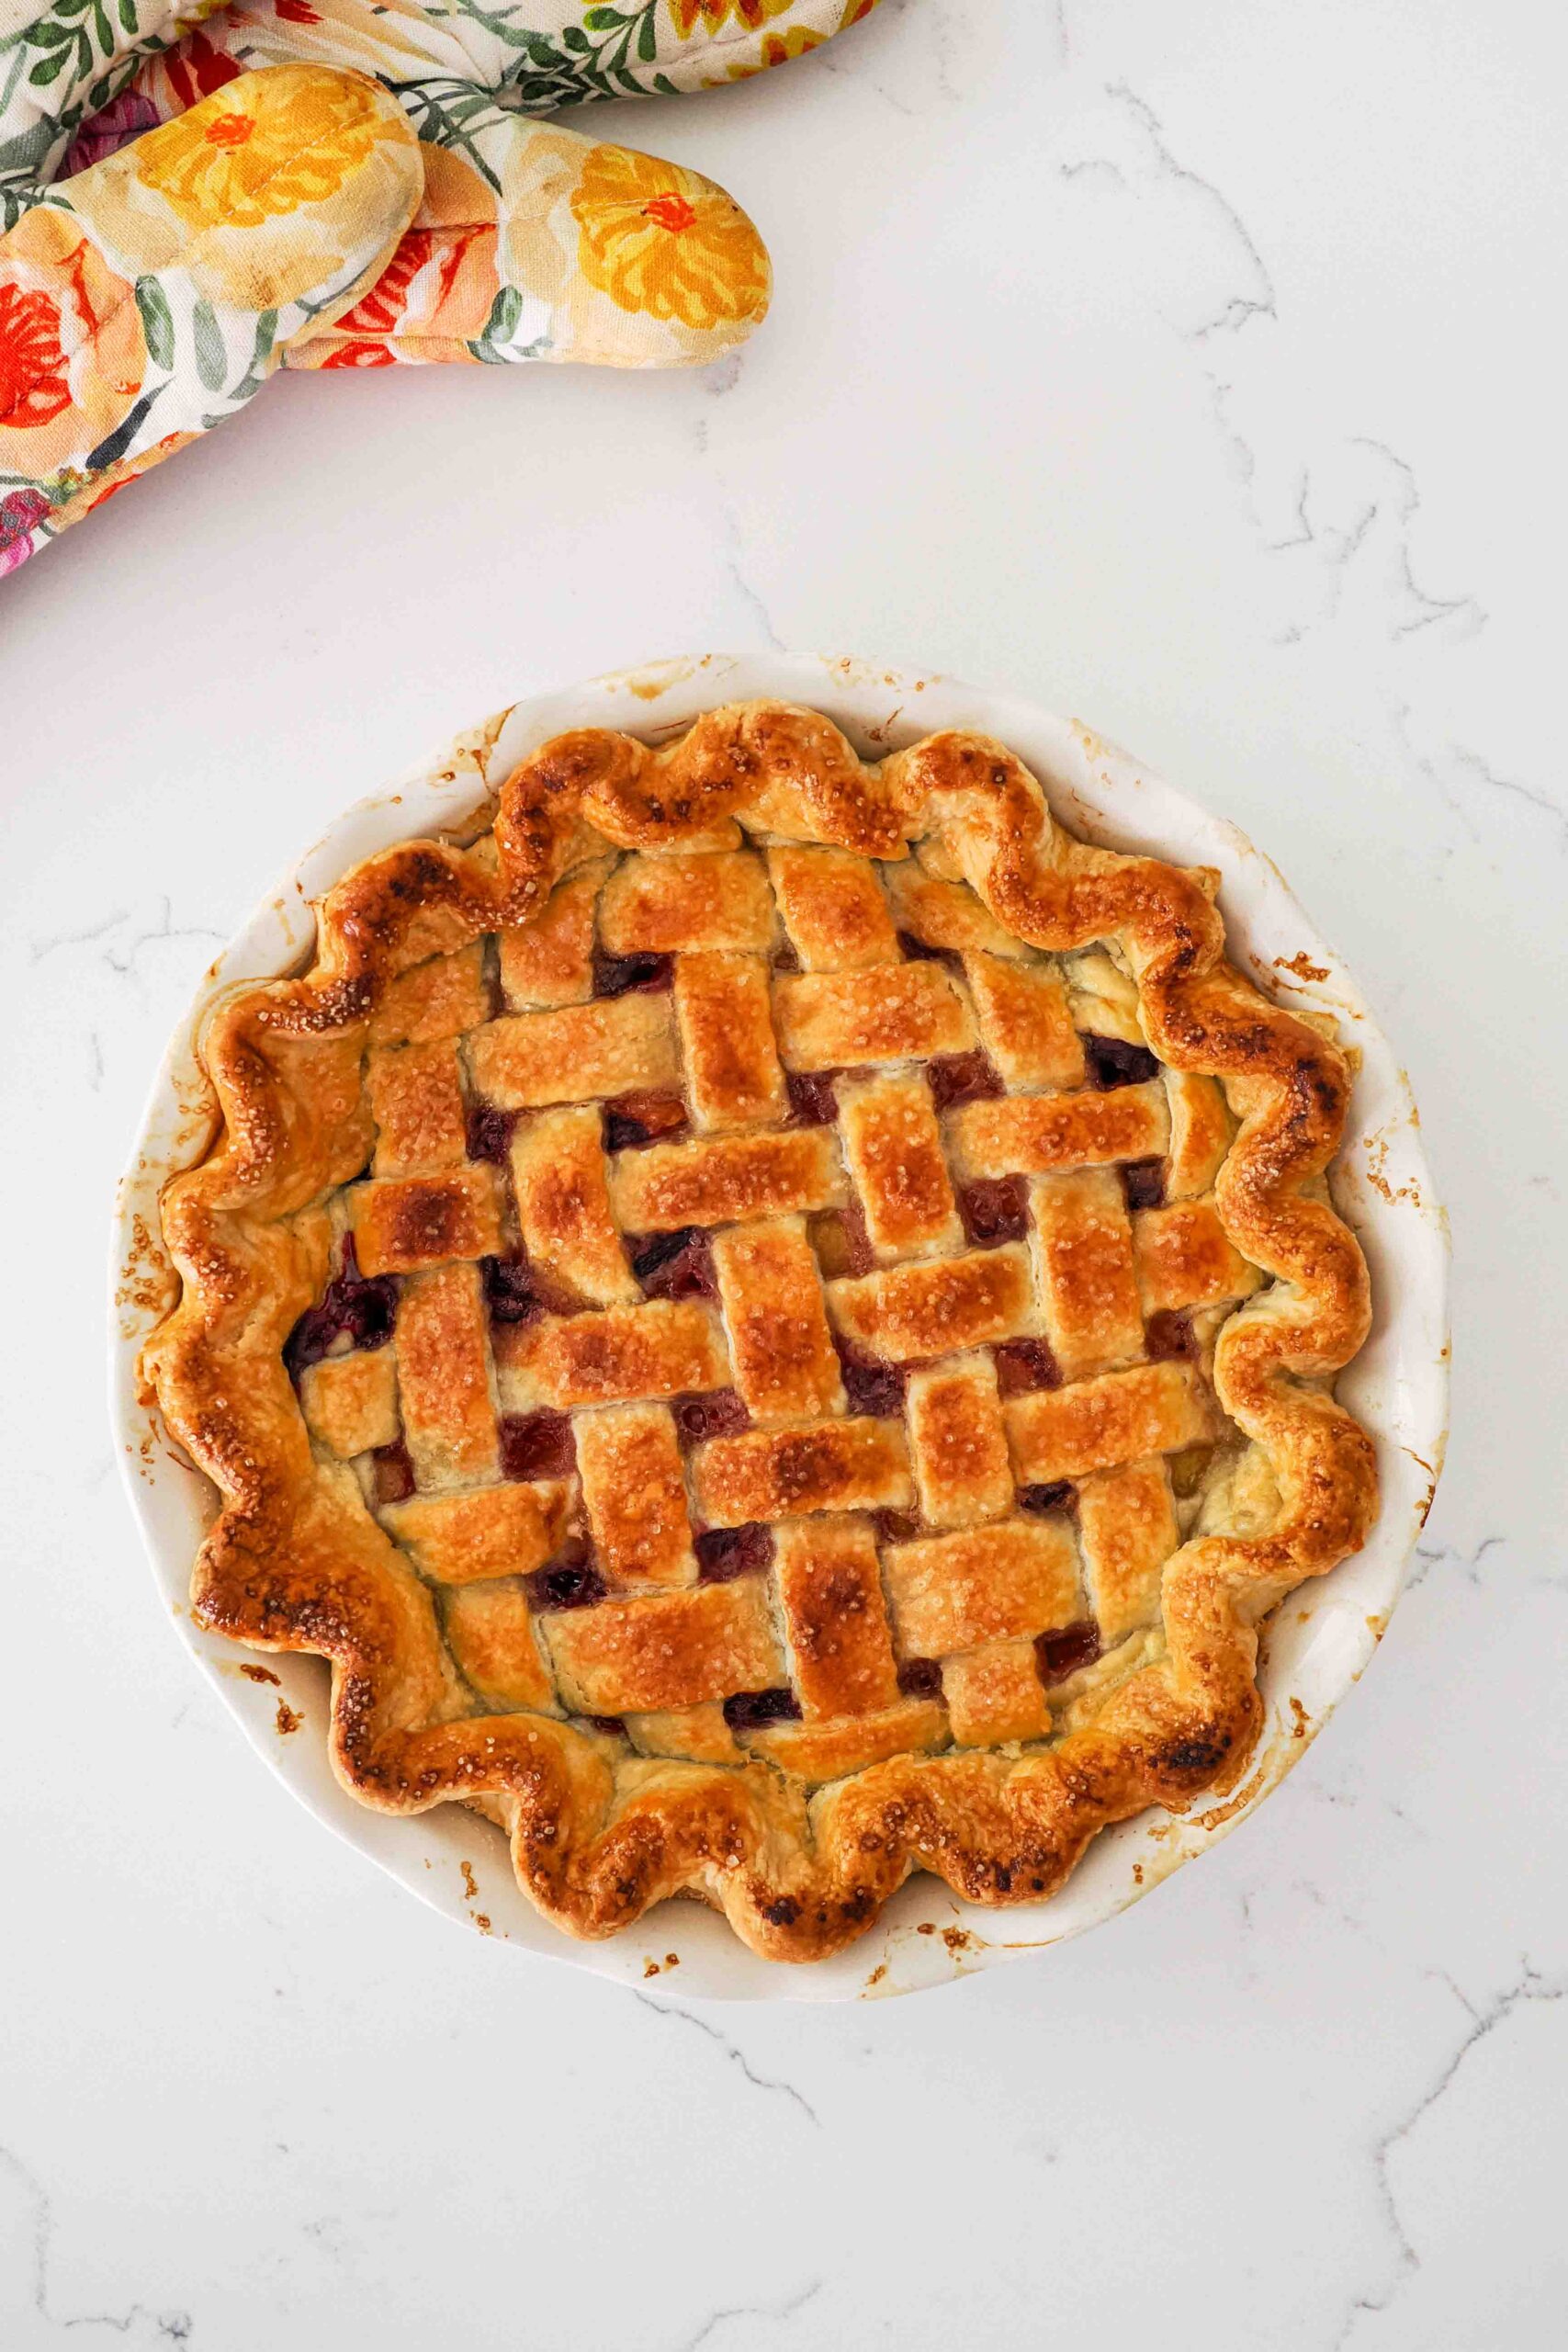 A fully baked and golden brown cherry lattice pie with almond extract.